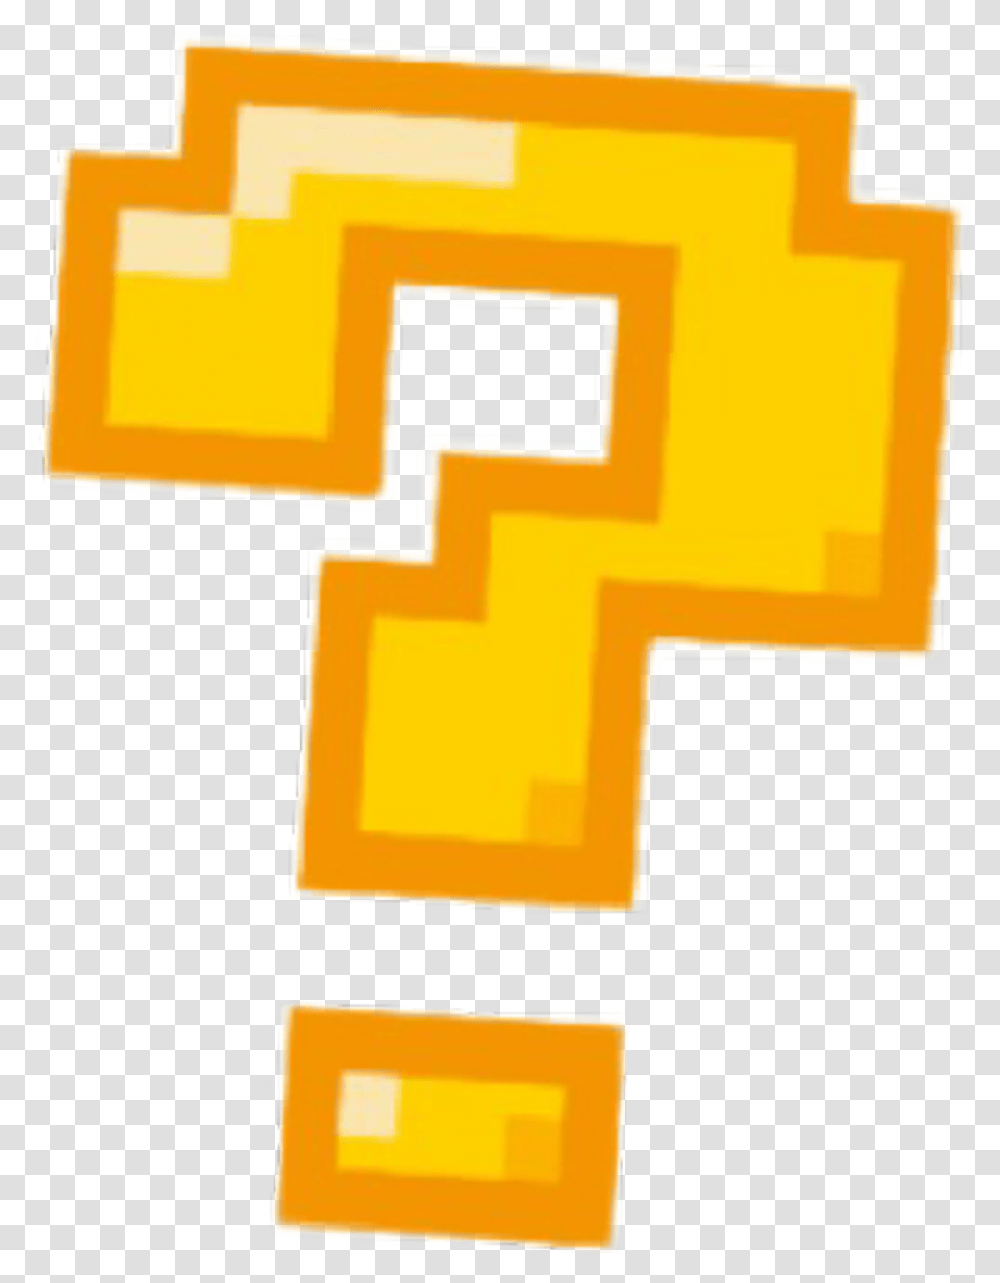 Yellow Sign Punctuation Pixel Questionmark Freetoedit Pixel Question Mark, Pac Man, Cross Transparent Png